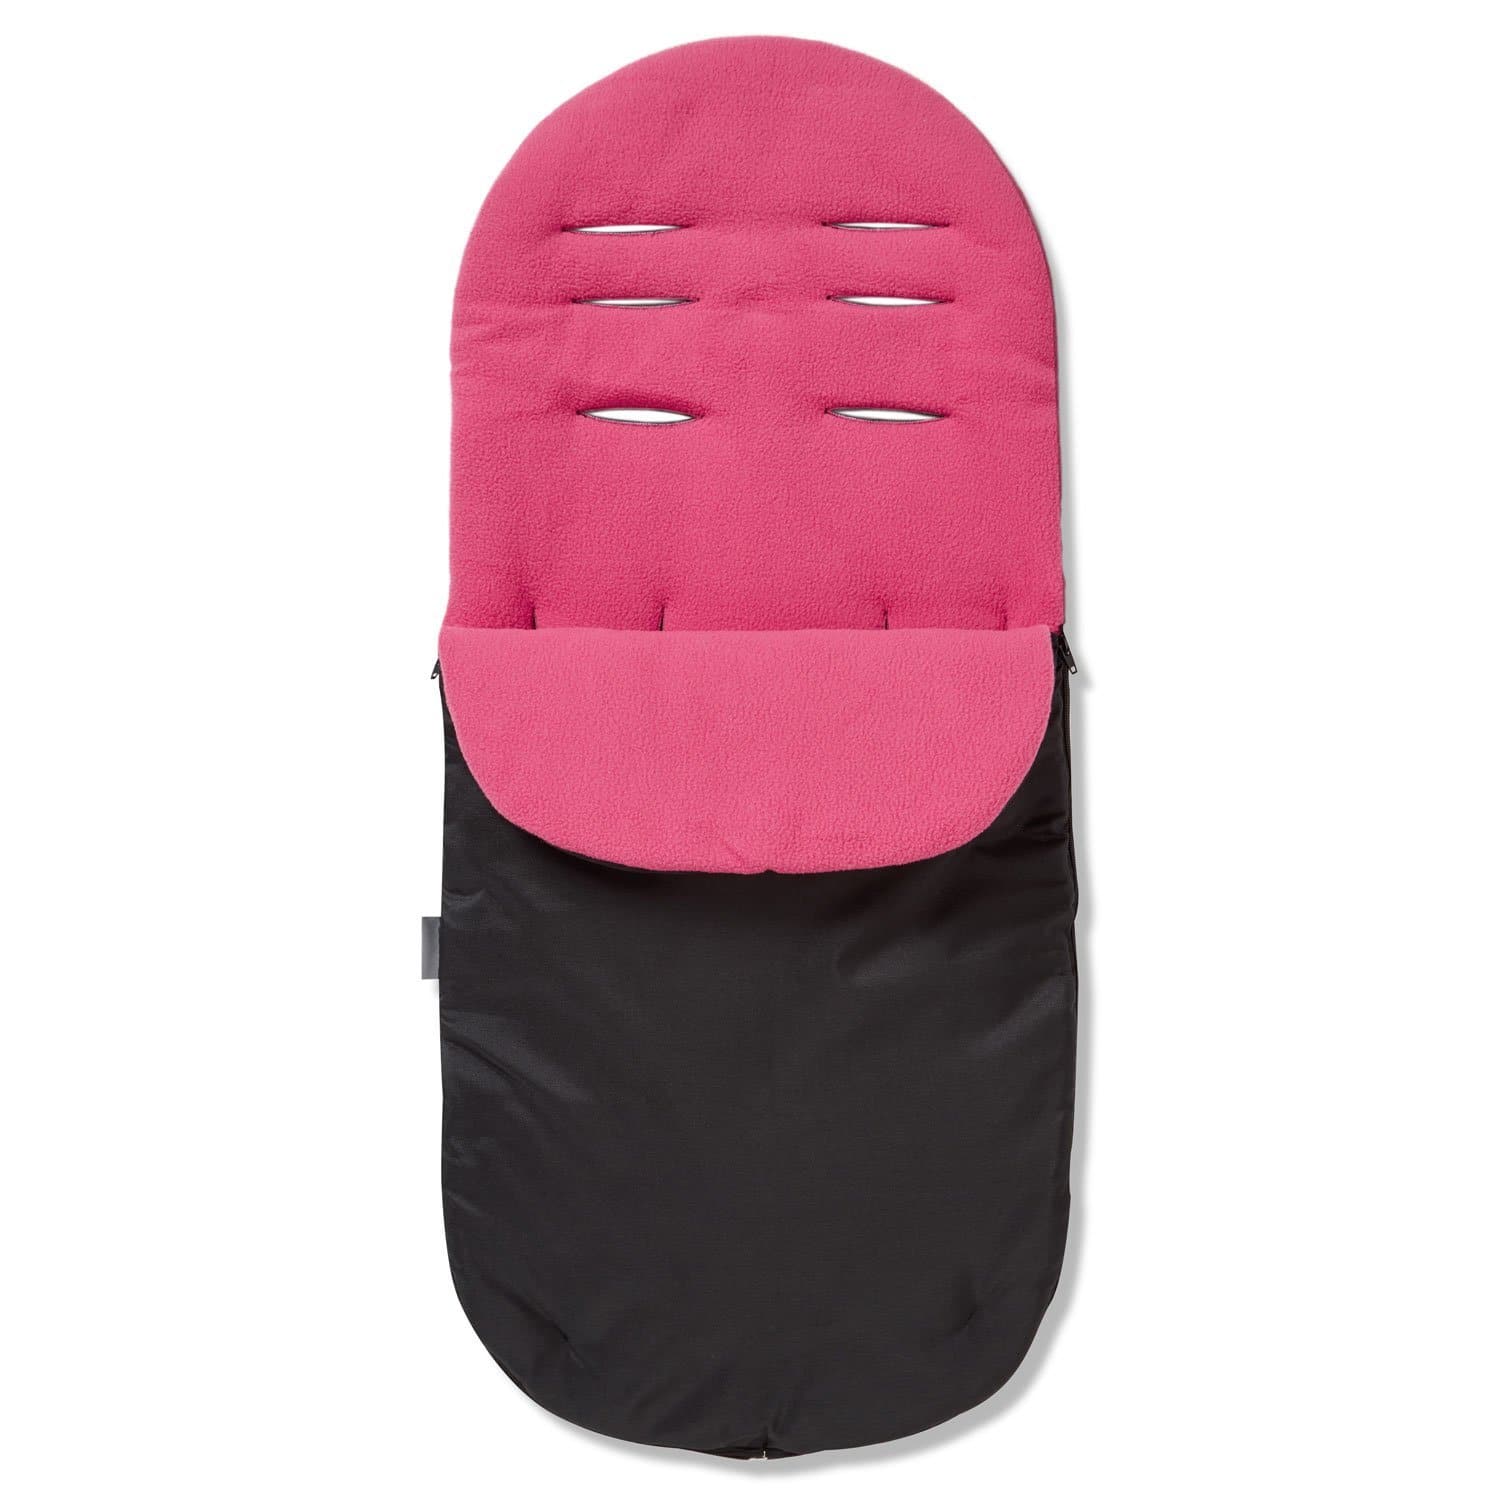 Footmuff / Cosy Toes Compatible with Pericles - Dark Pink / Fits All Models | For Your Little One